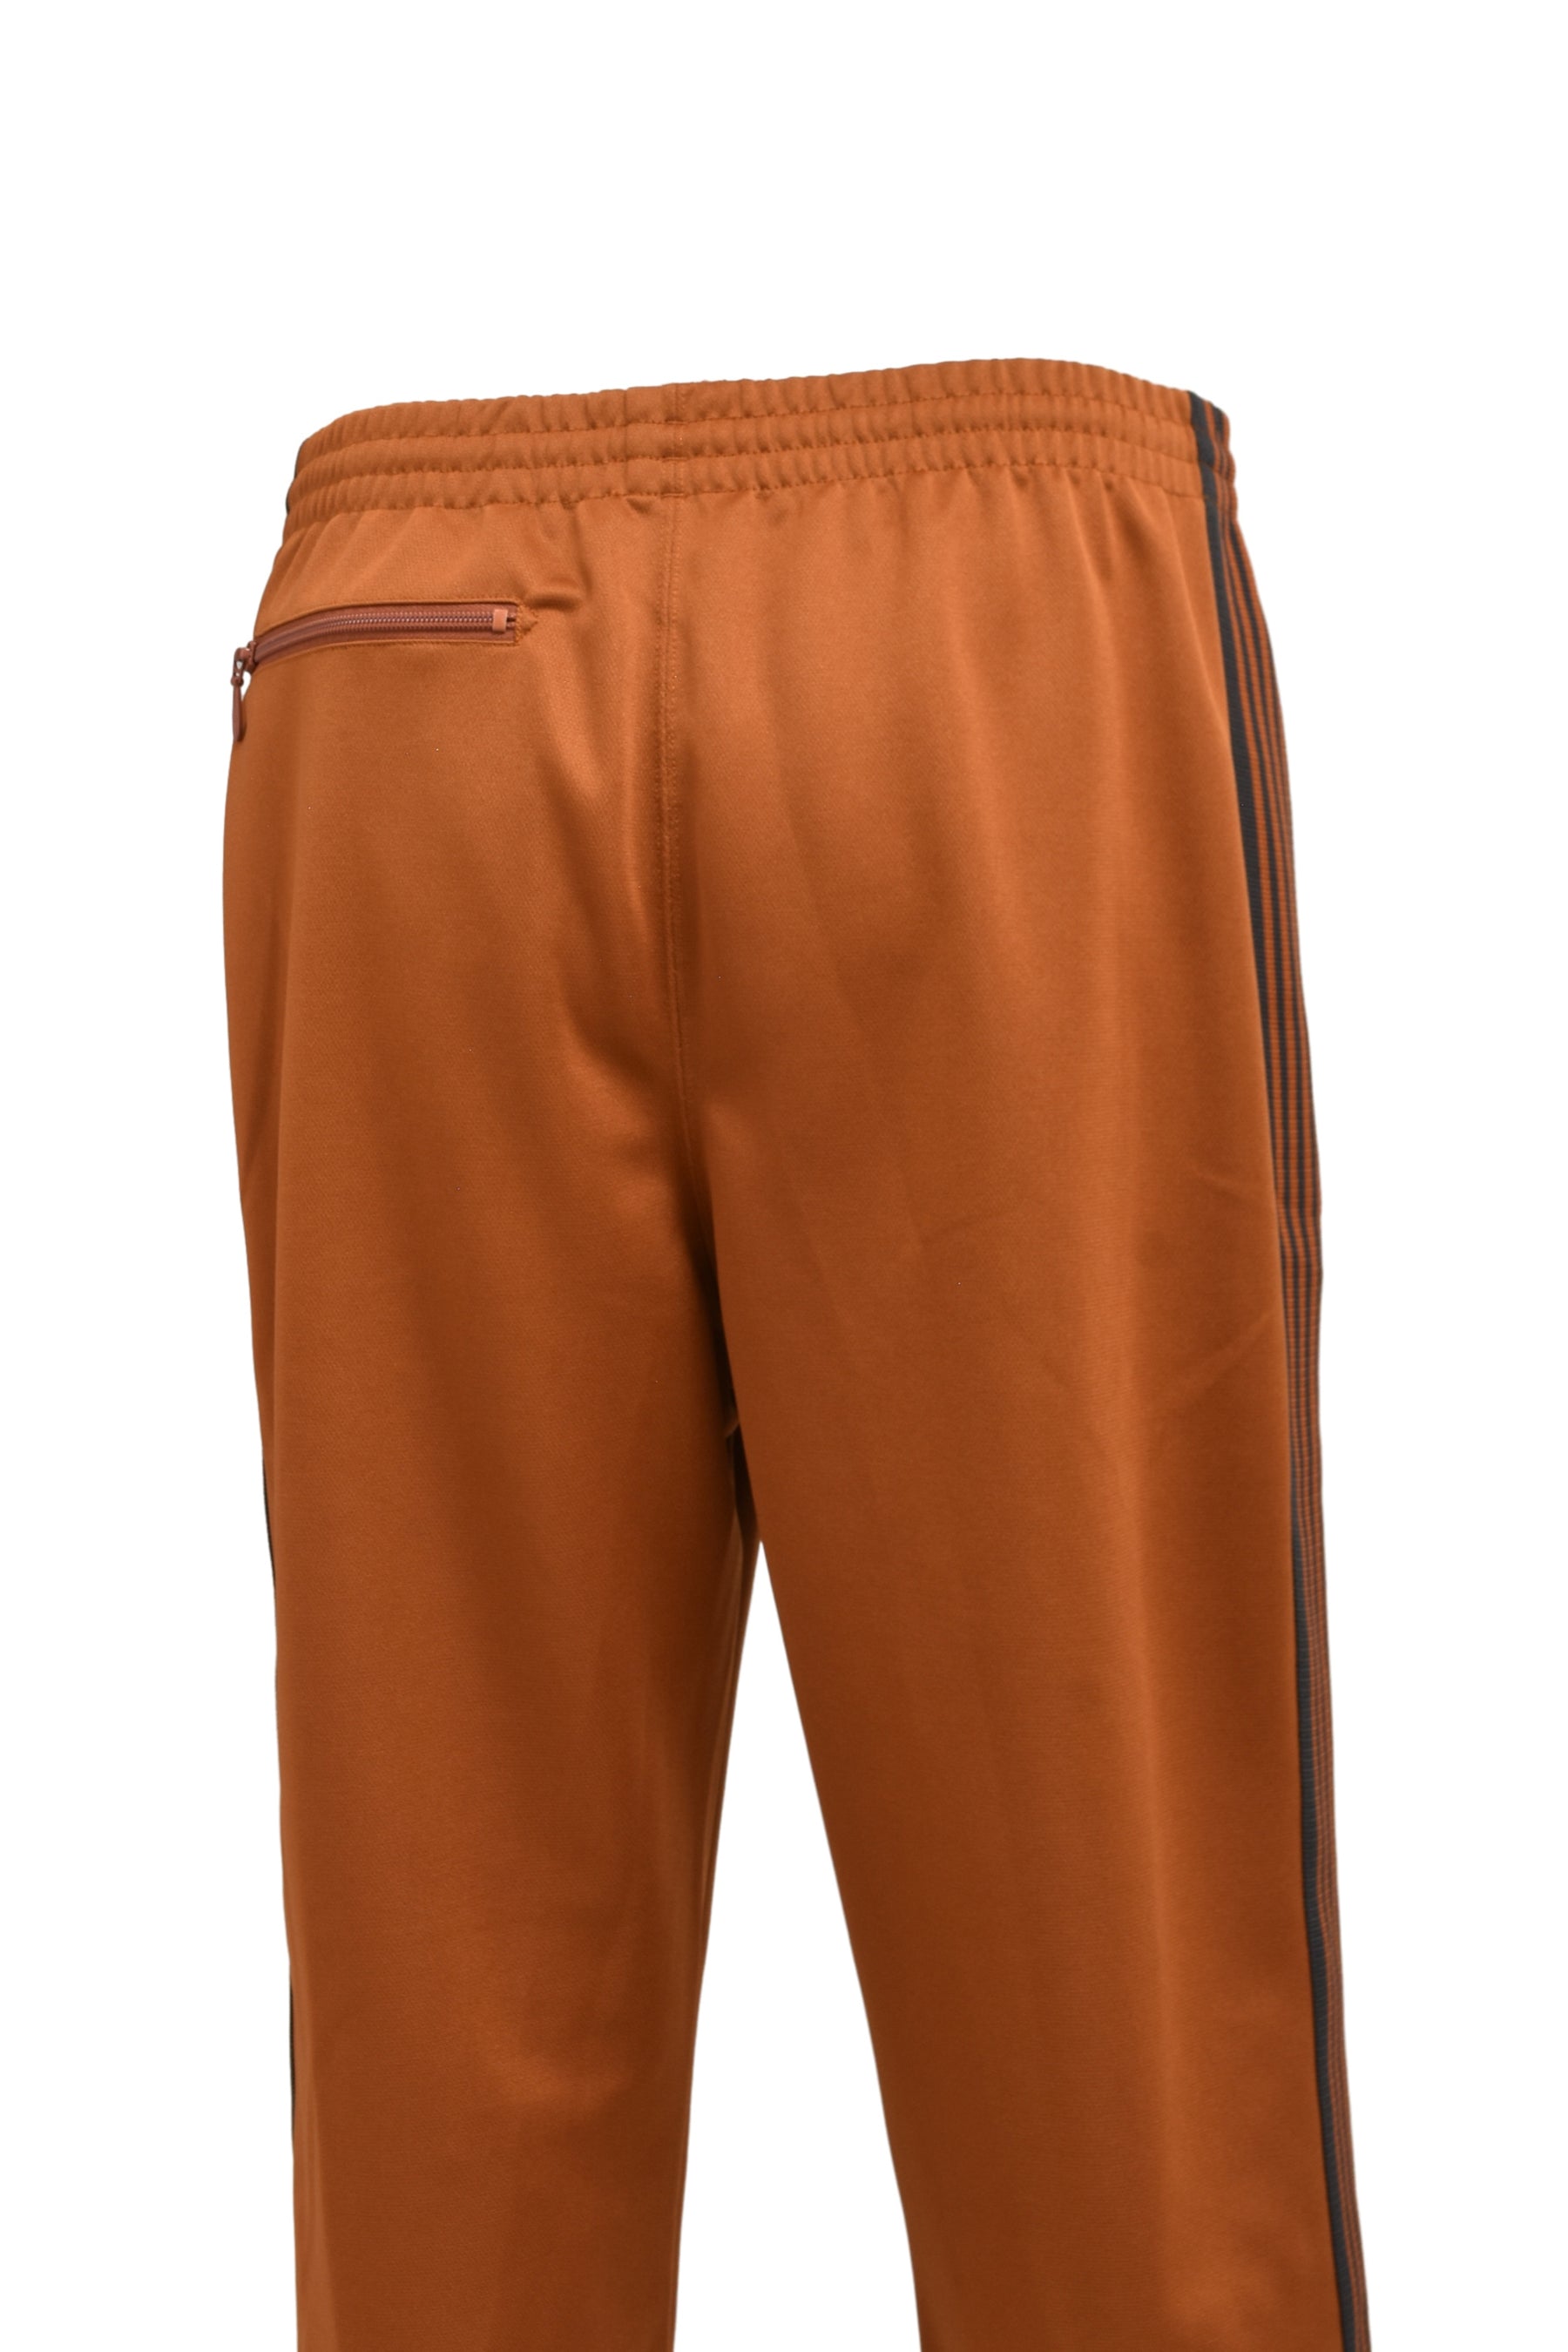 TRACK PANT - POLY SMOOTH / RUST